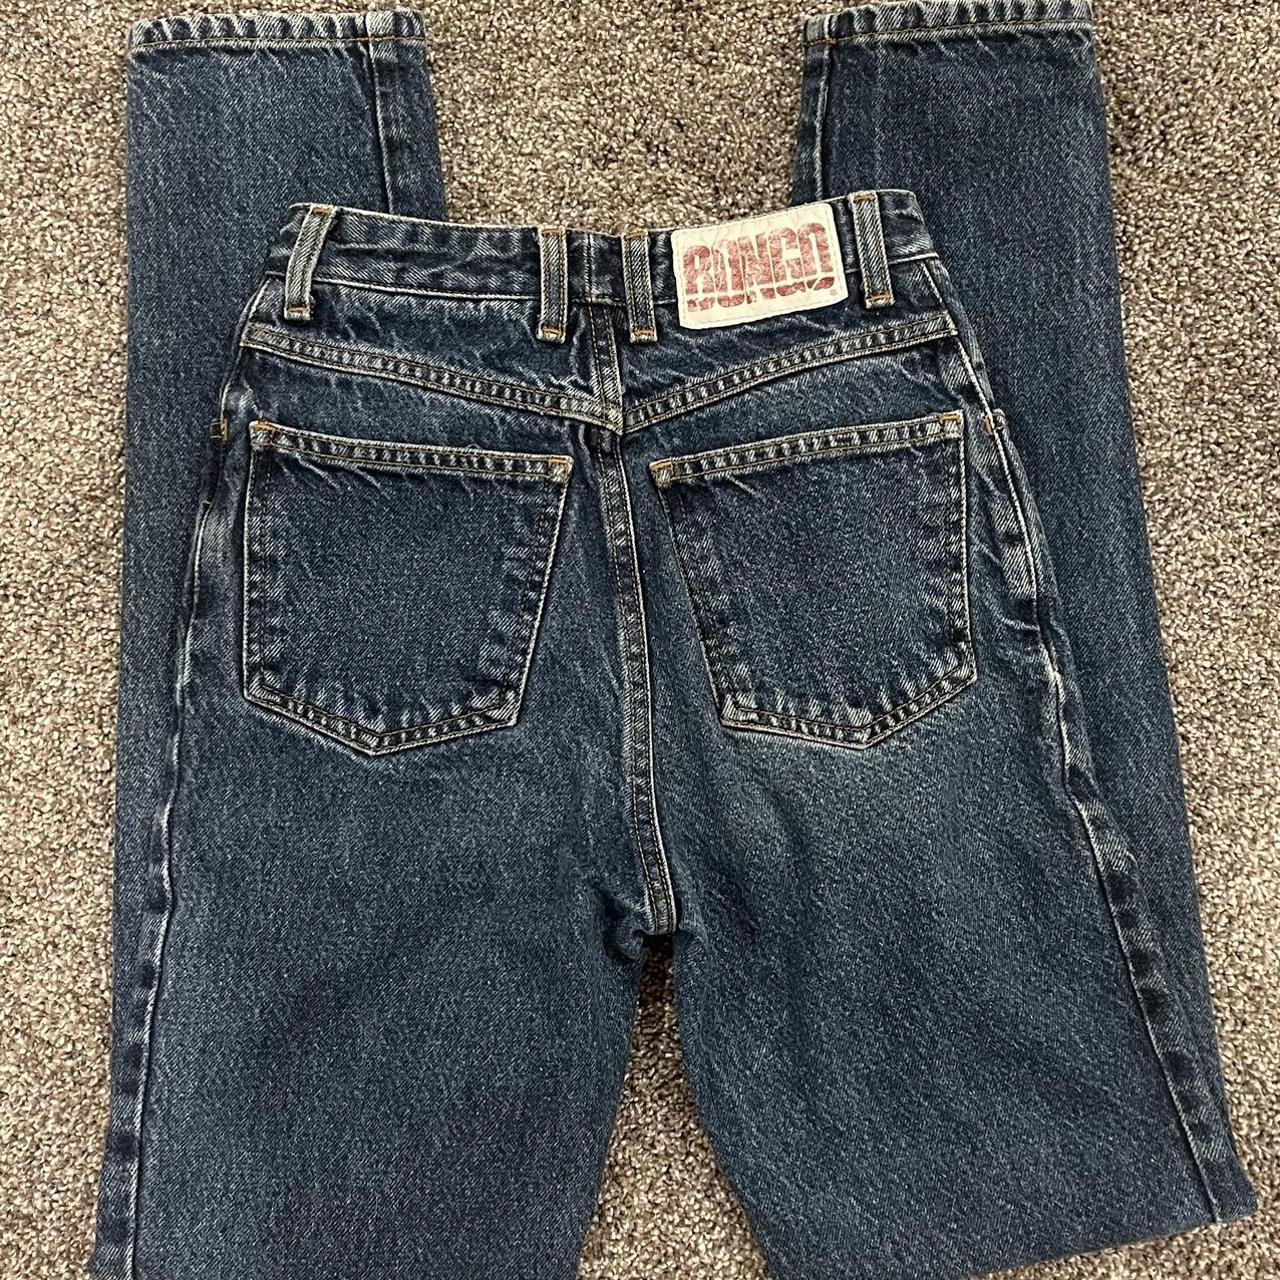 Vintage Bongo Jeans!☎️ In great condition, they're... - Depop